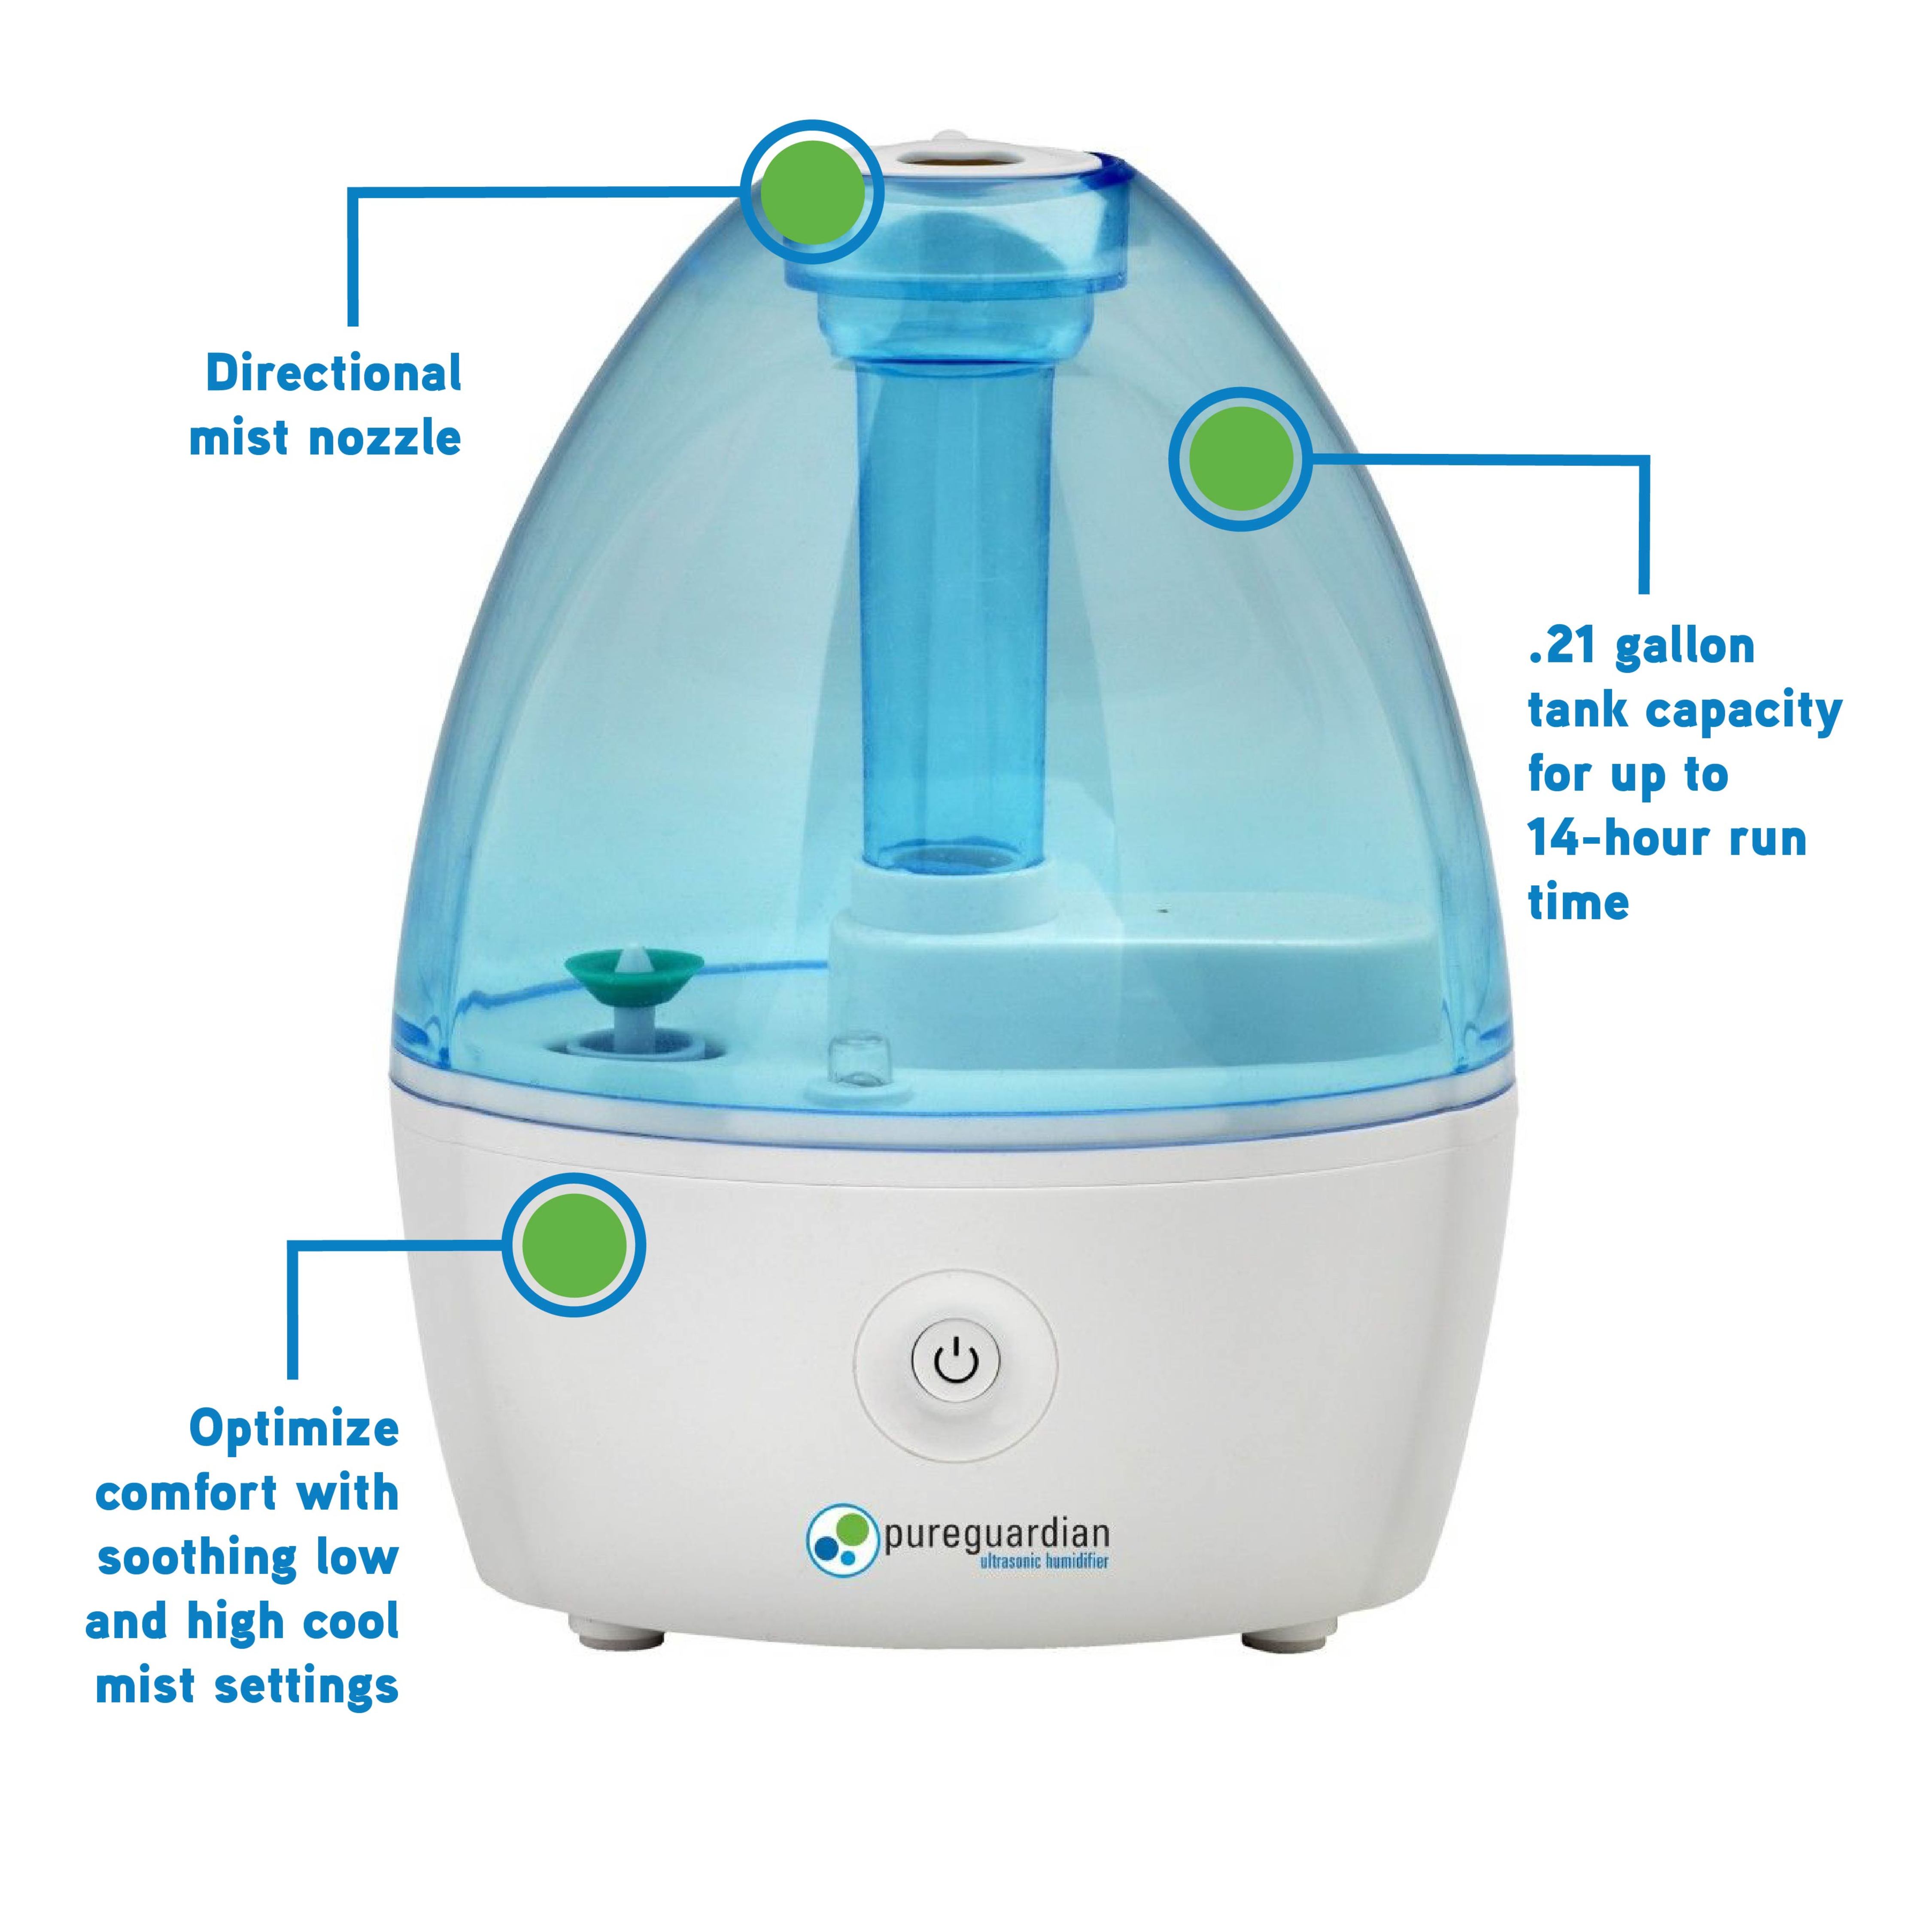 PureGuardian 0.21 Gallon 210 Sq. ft Cool Mist Ultrasonic Humidifier 14-Hour Runtime, H910BL - image 5 of 9